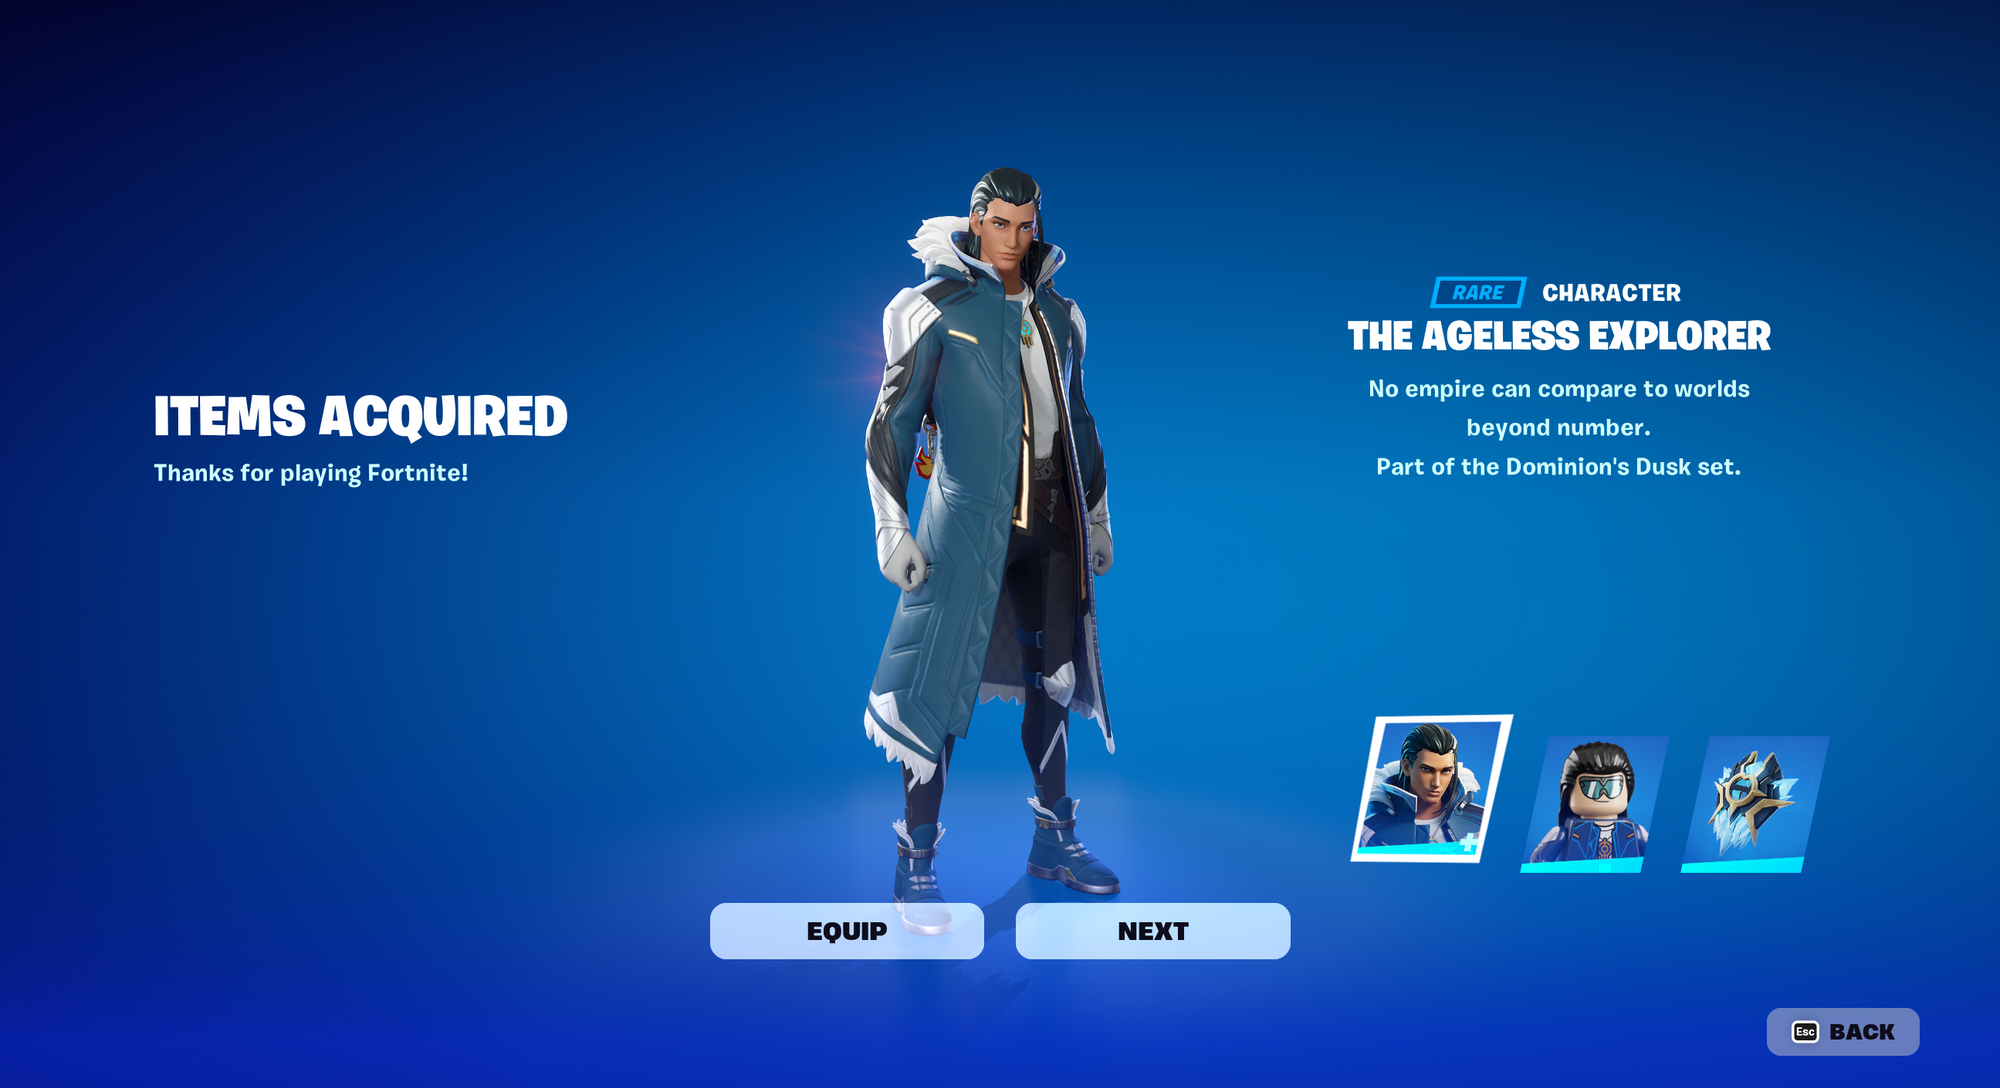 New Ageless Explorer Outfit Available Now